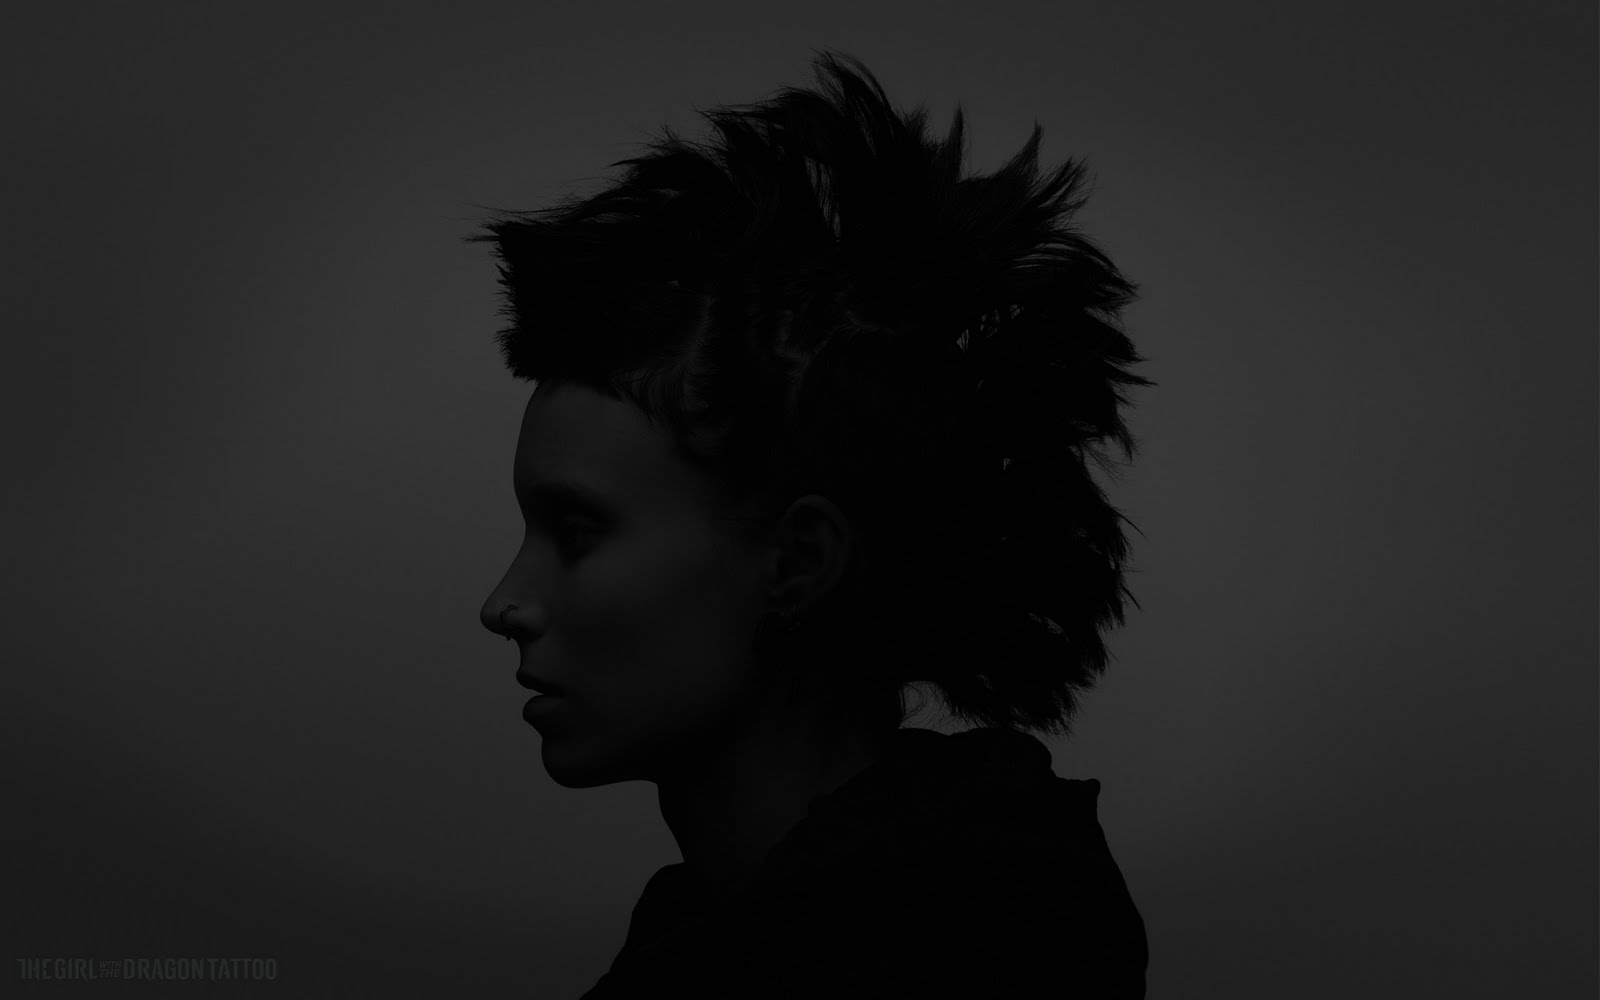 The Girl With The Dragon Tattoo Artwork